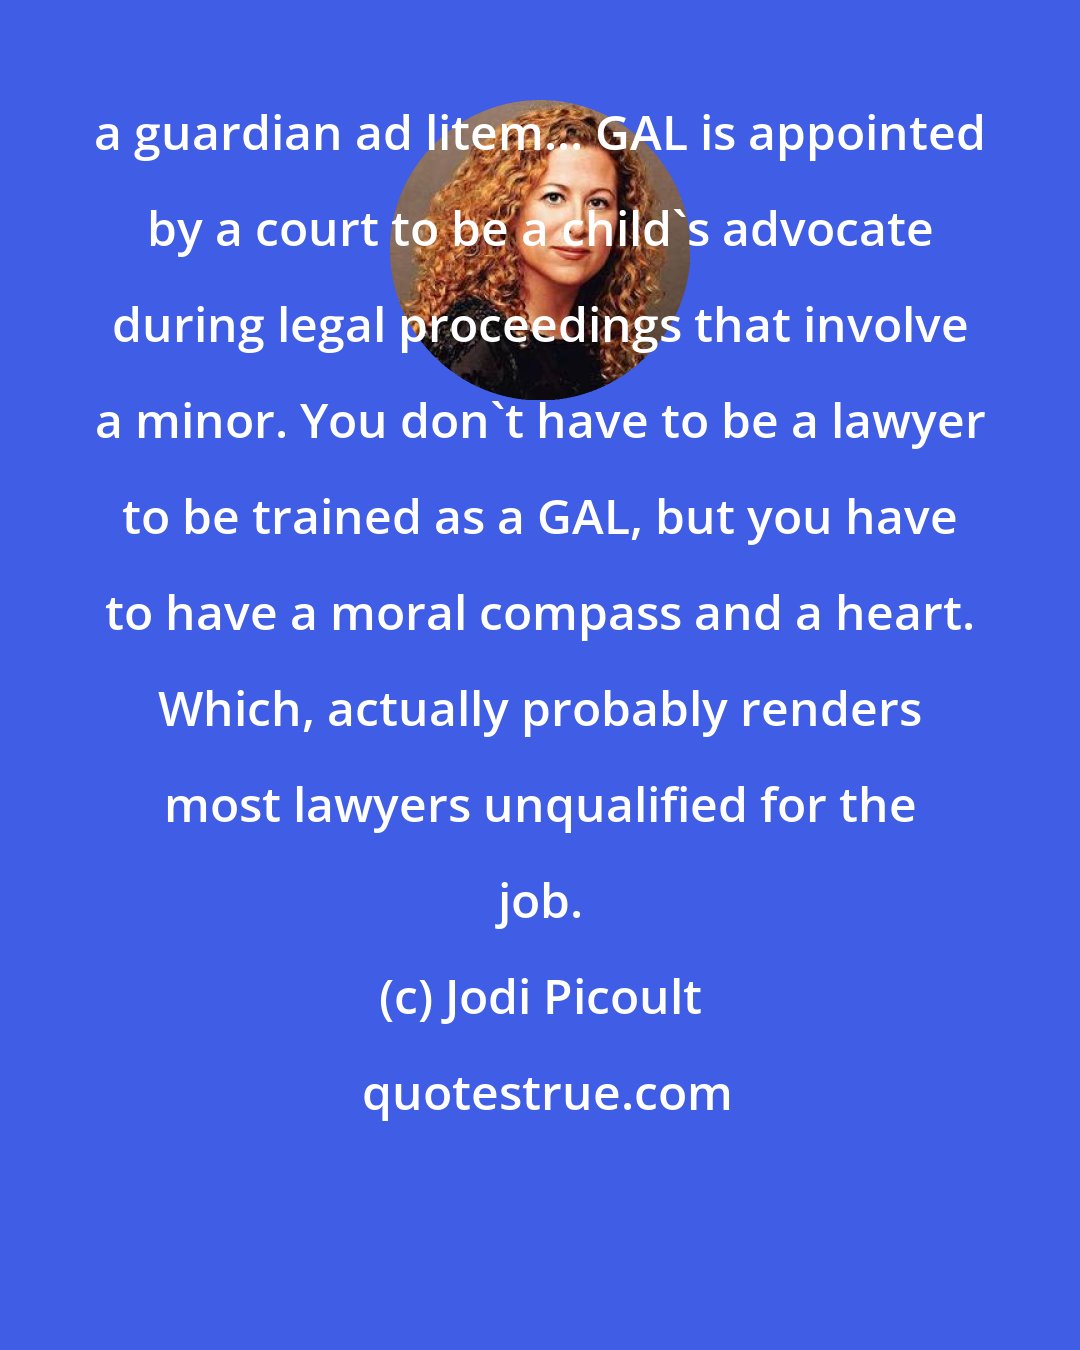 Jodi Picoult: a guardian ad litem... GAL is appointed by a court to be a child's advocate during legal proceedings that involve a minor. You don't have to be a lawyer to be trained as a GAL, but you have to have a moral compass and a heart. Which, actually probably renders most lawyers unqualified for the job.